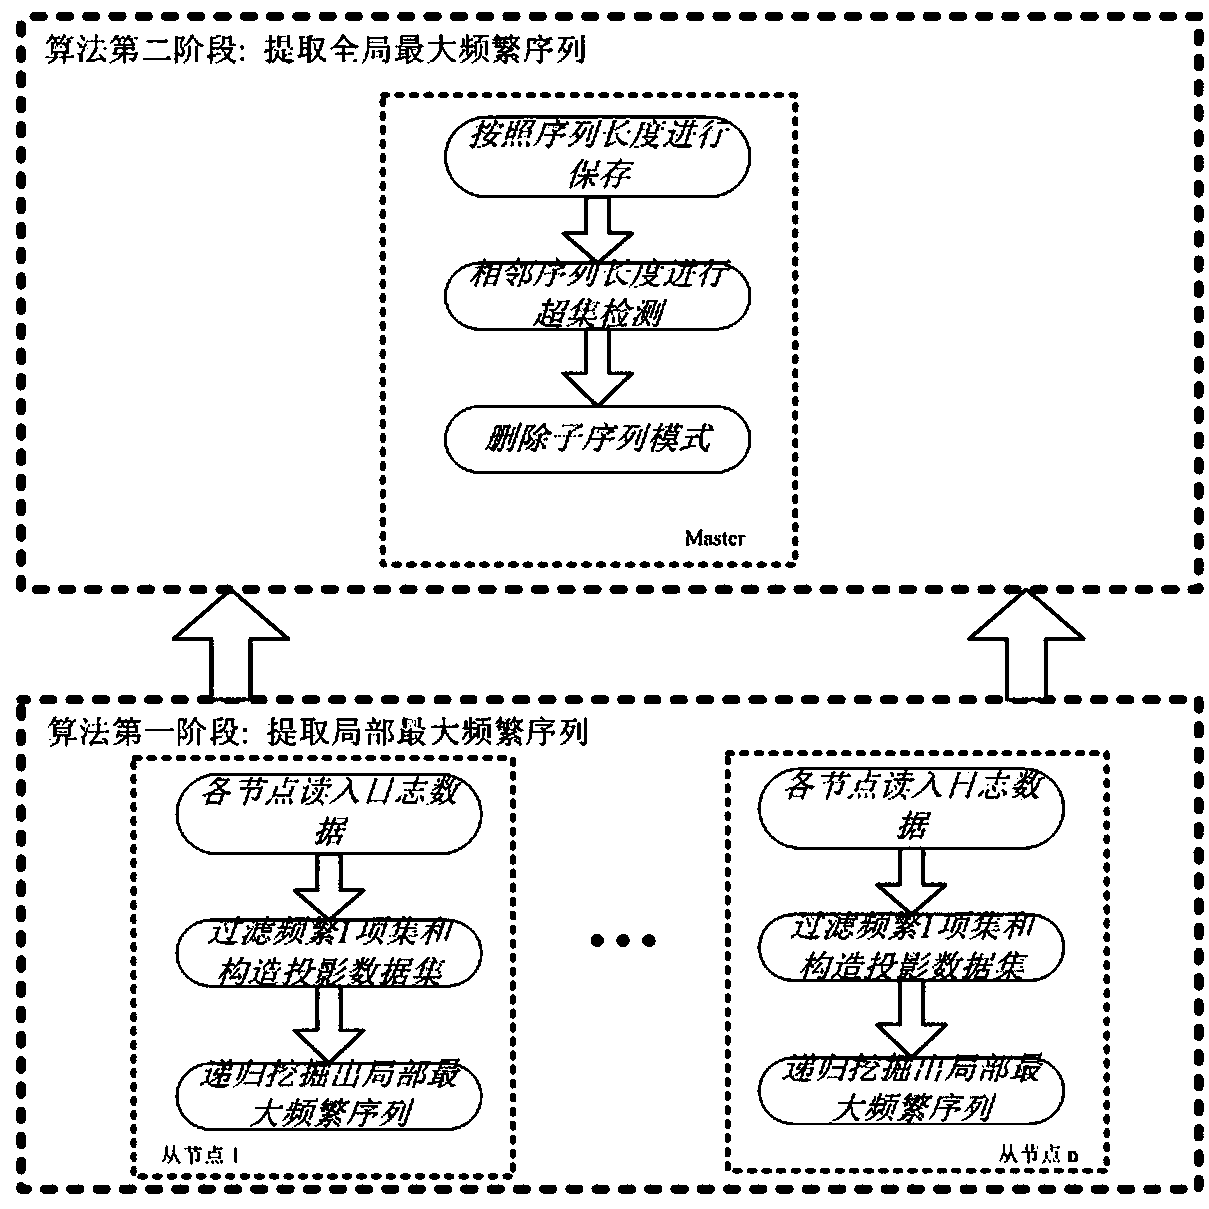 Maximal frequent sequential pattern mining method based on distributed log